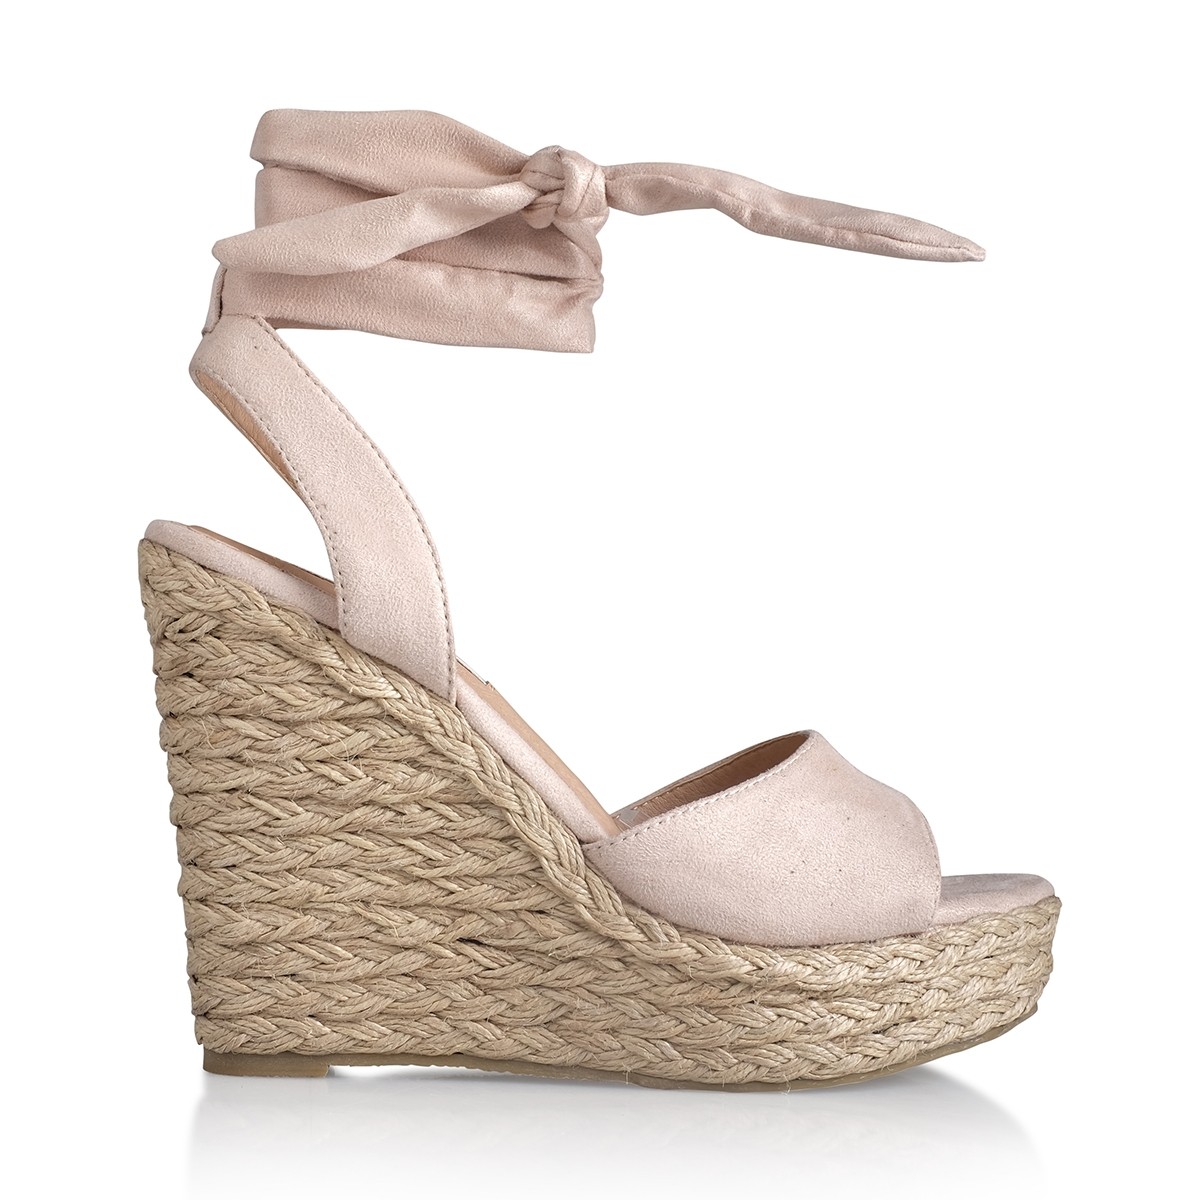 Skyros Blush Suede by Billini Shoes on Sale | ShoeSales